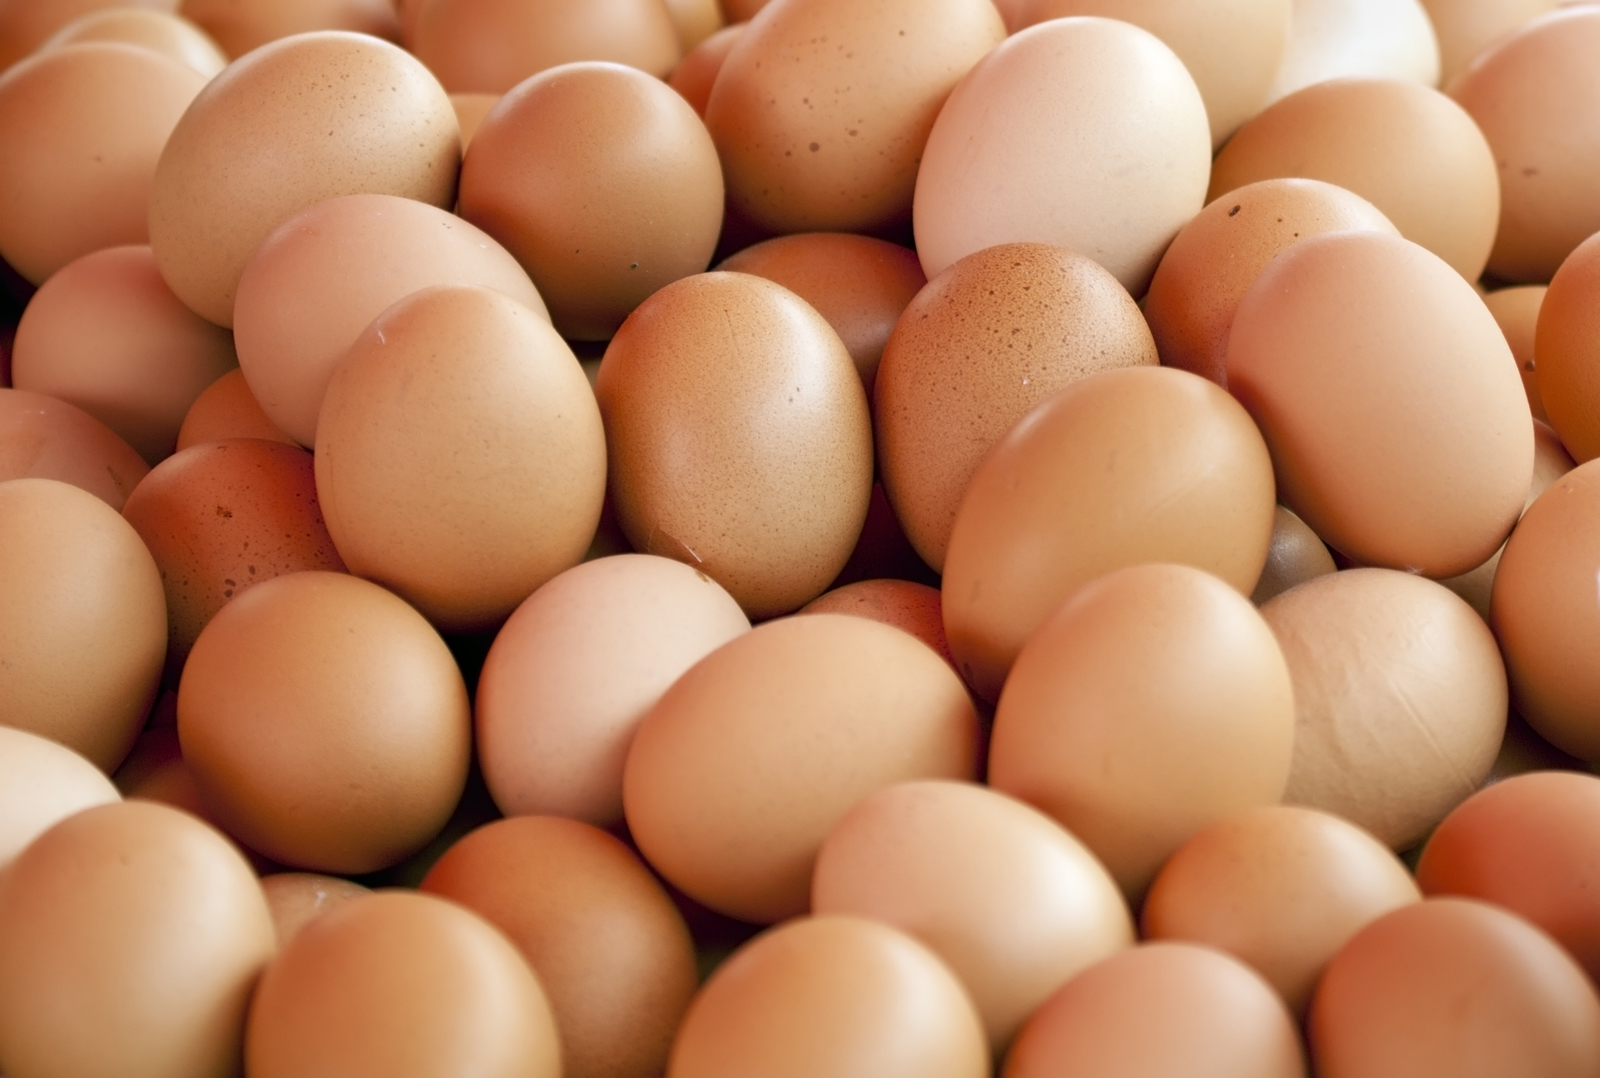 Predictive modelling of egg production quality and quantity using supervised machine learning algorithms